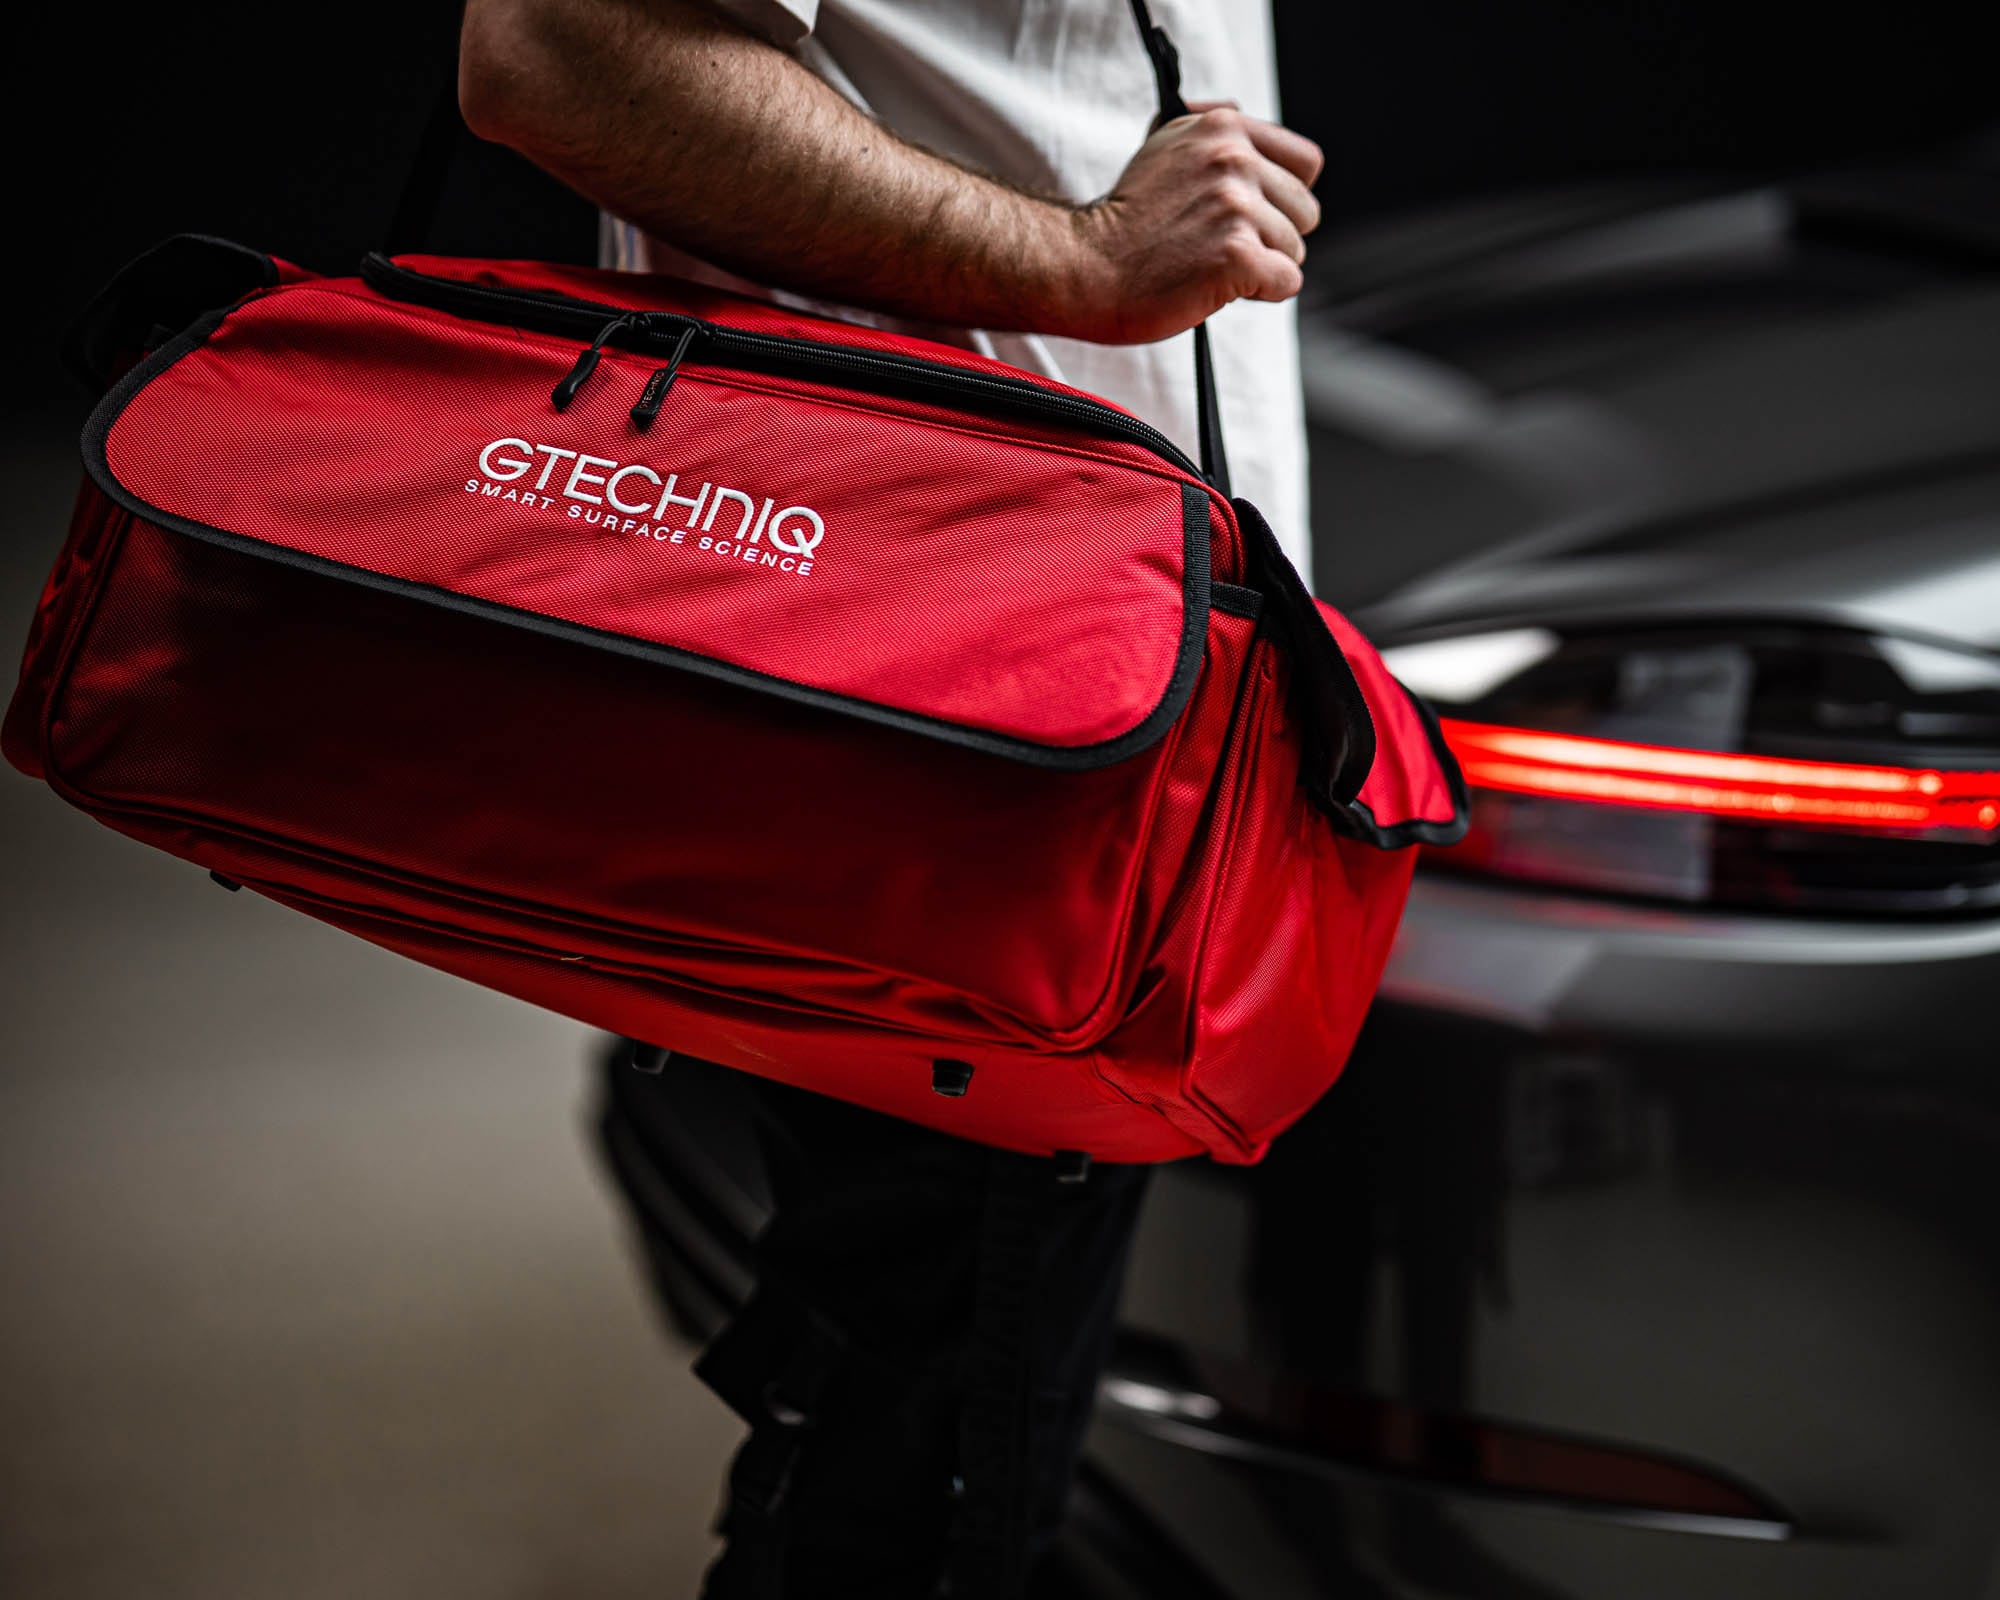 Get organised with the Gtechniq Detailing Bag!